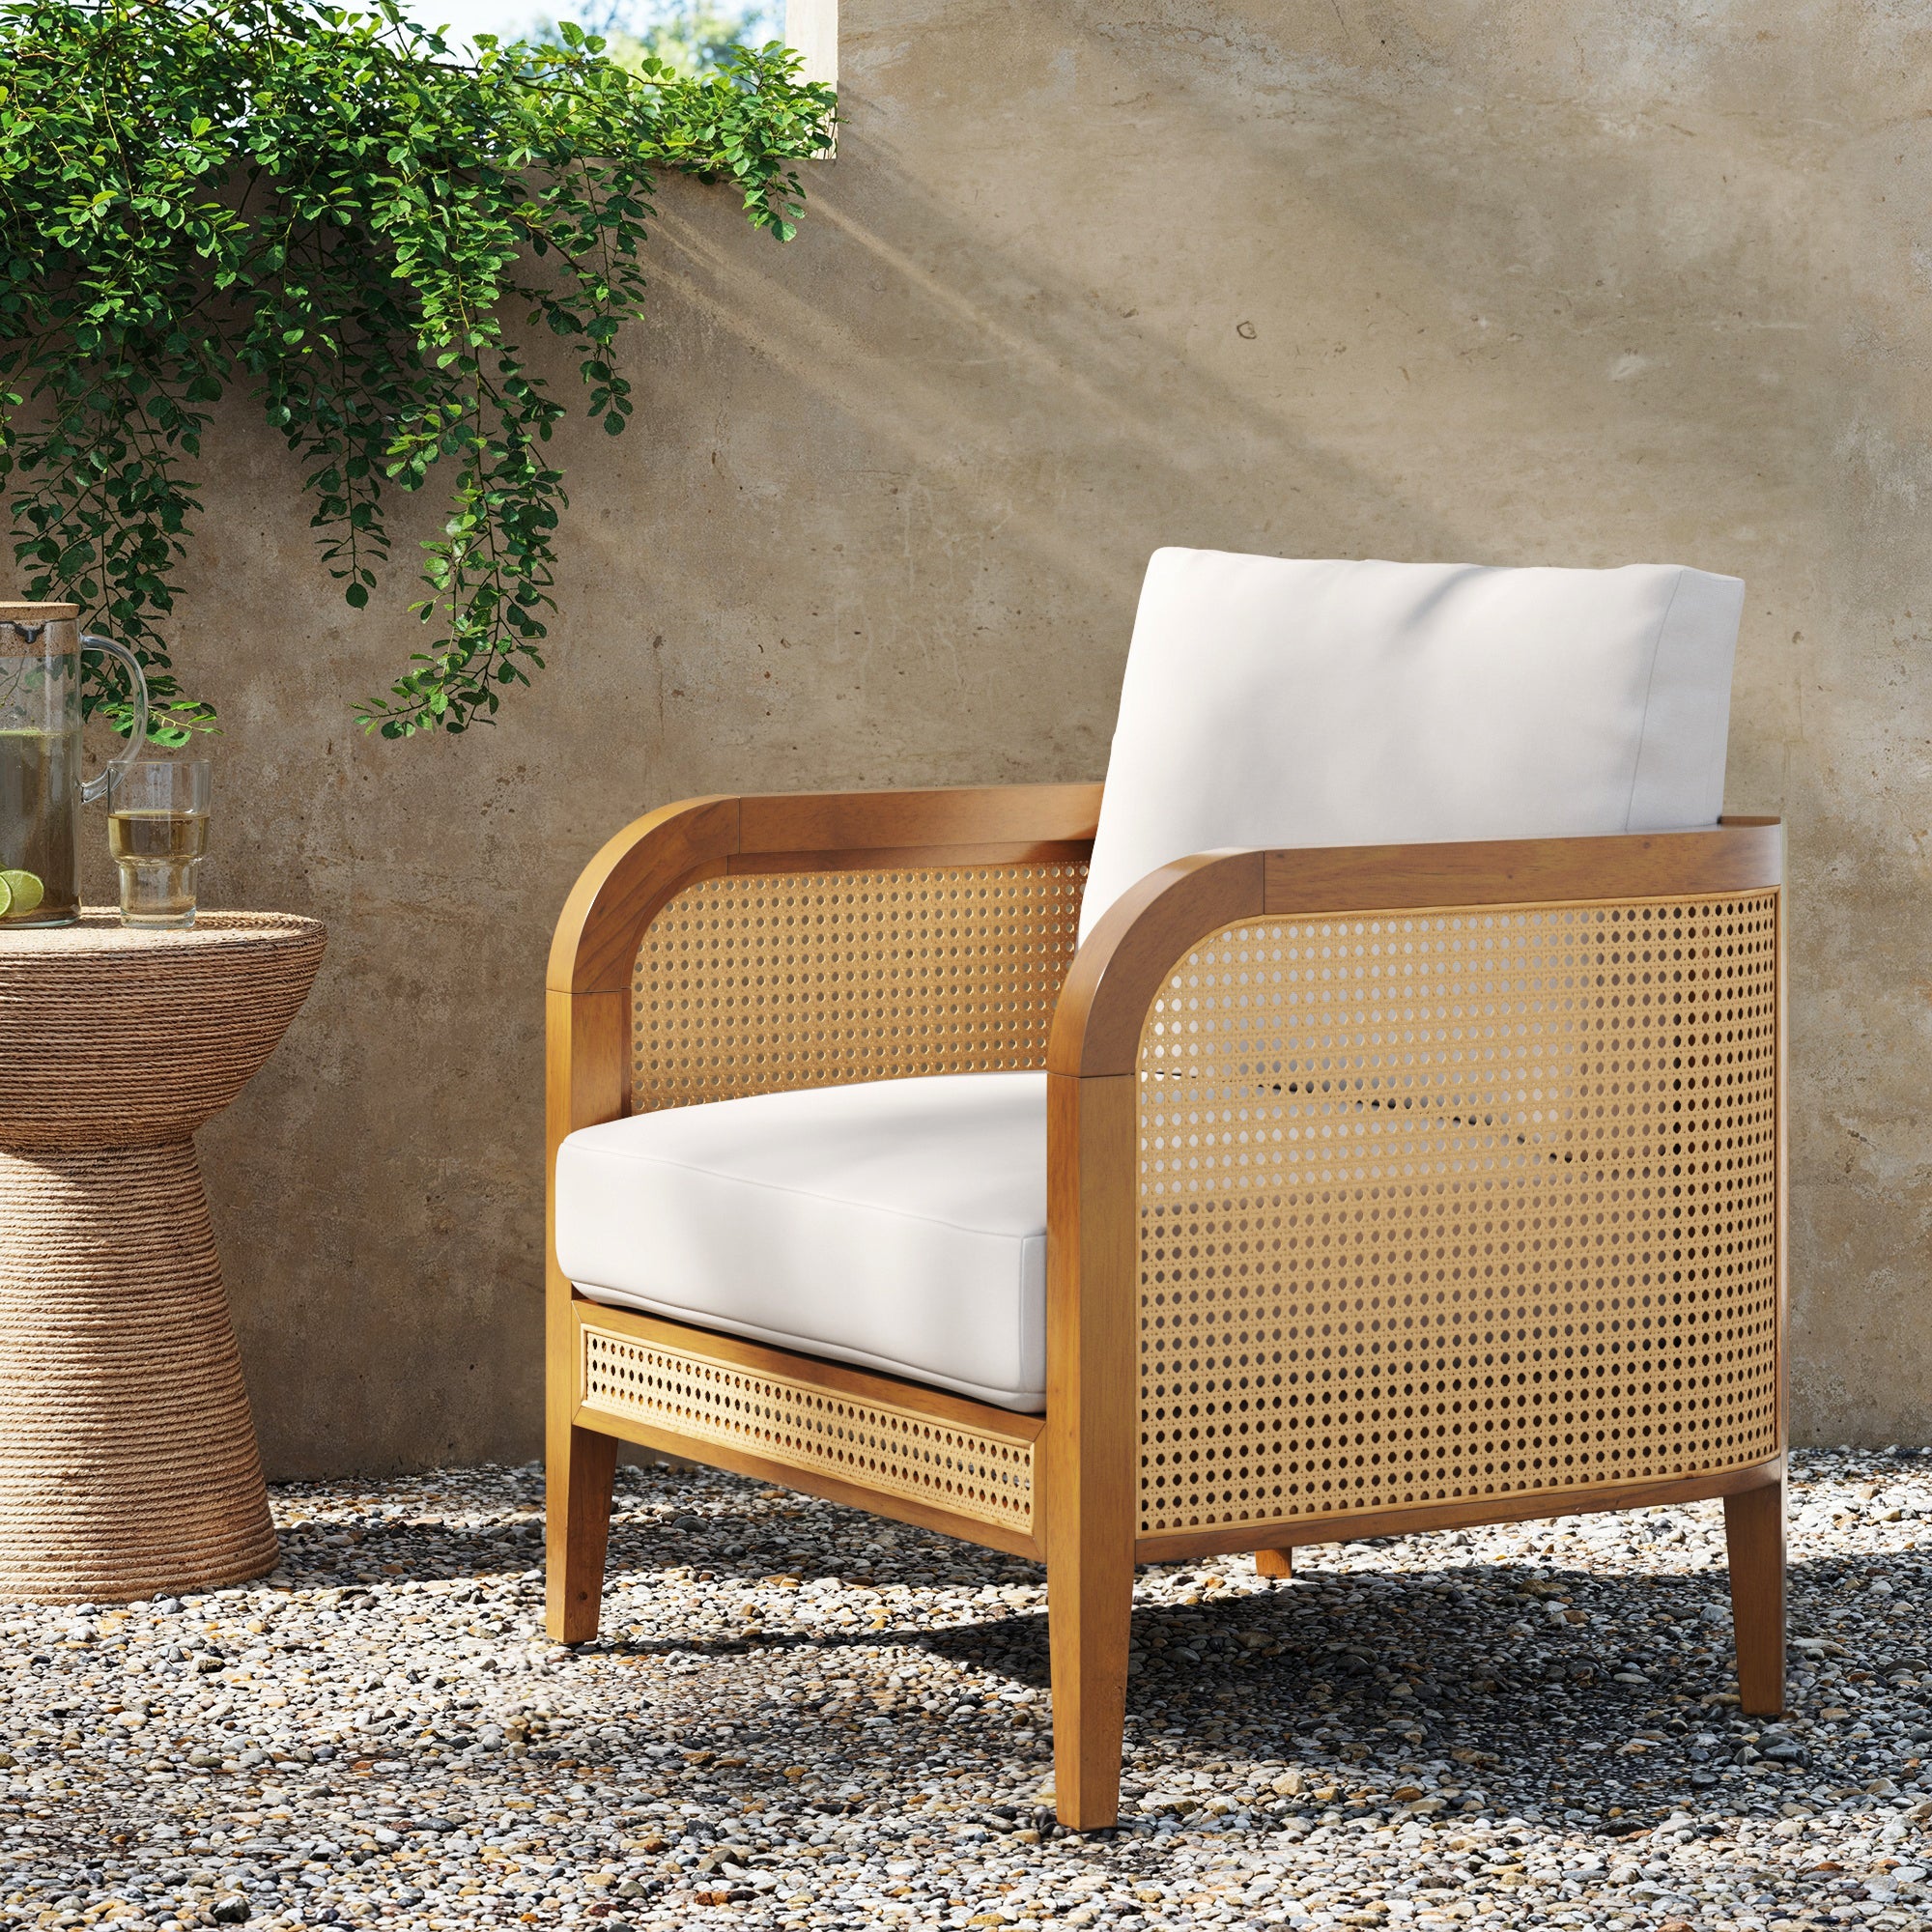 Set of 2 Rattan Outdoor Patio Arm Chairs